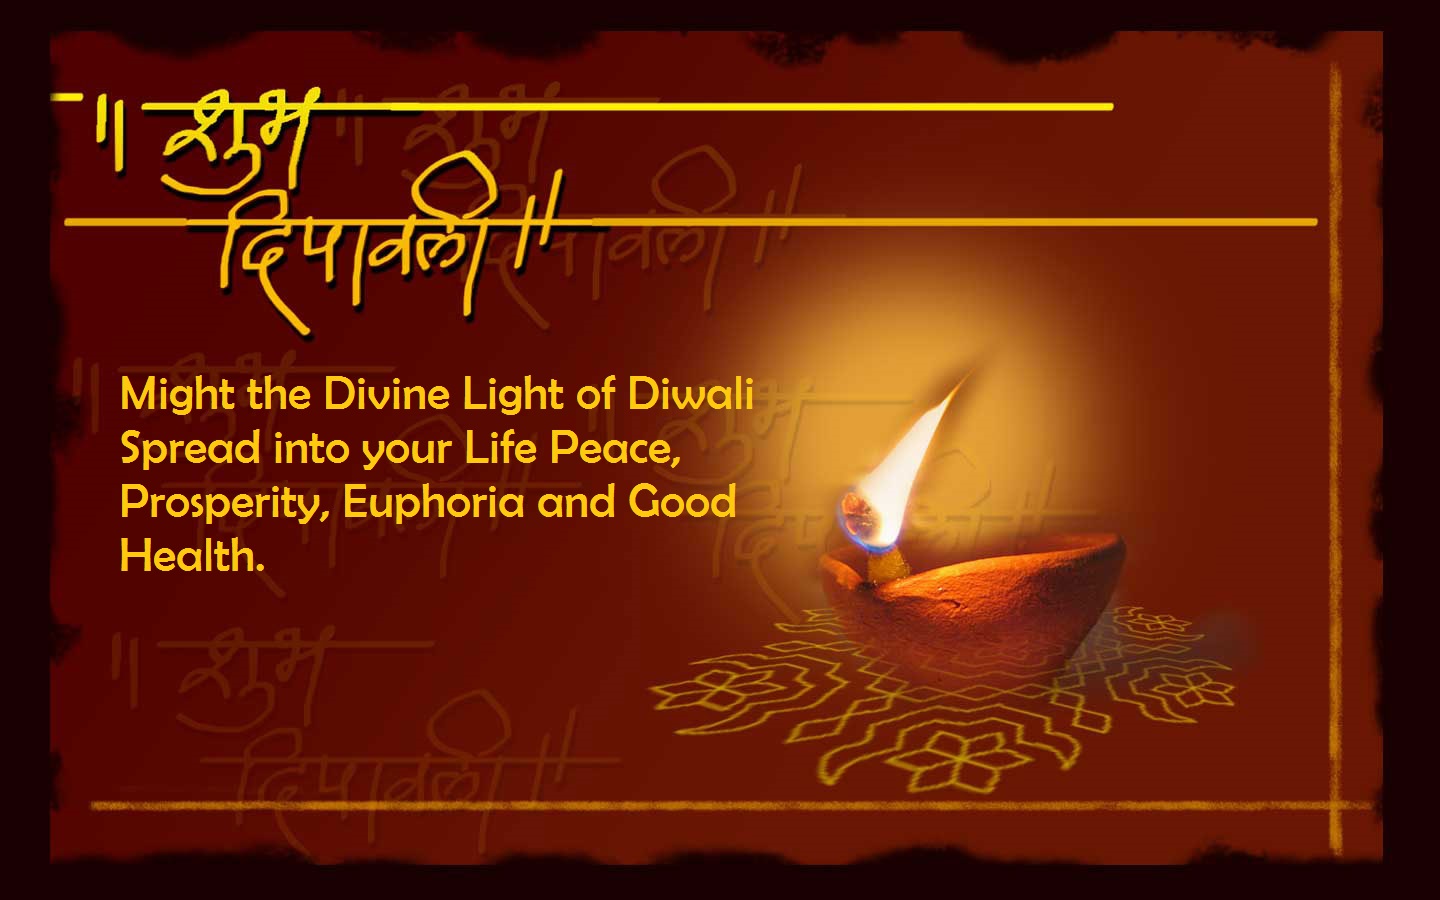 Happy Diwali 2018 Quotes, Images, Wishes and Greetings, Messages